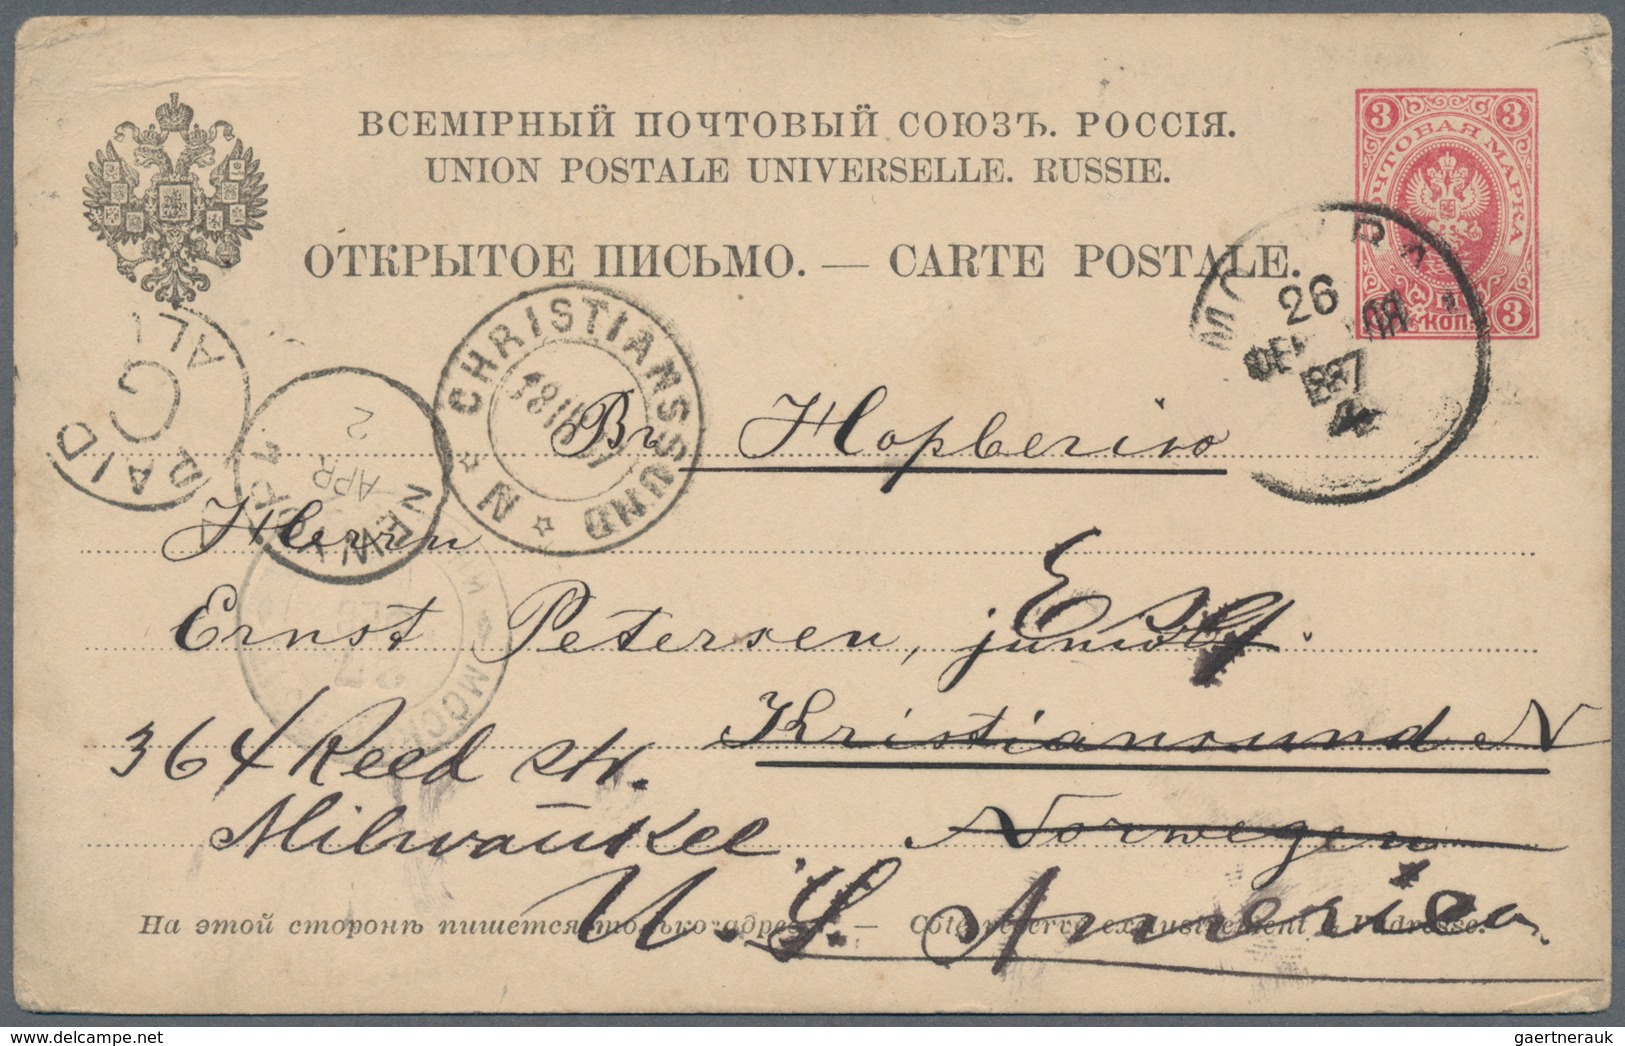 Russland: 1887/1922, lot of twelve covers/cards (incl. three Baltic states) with special features, e